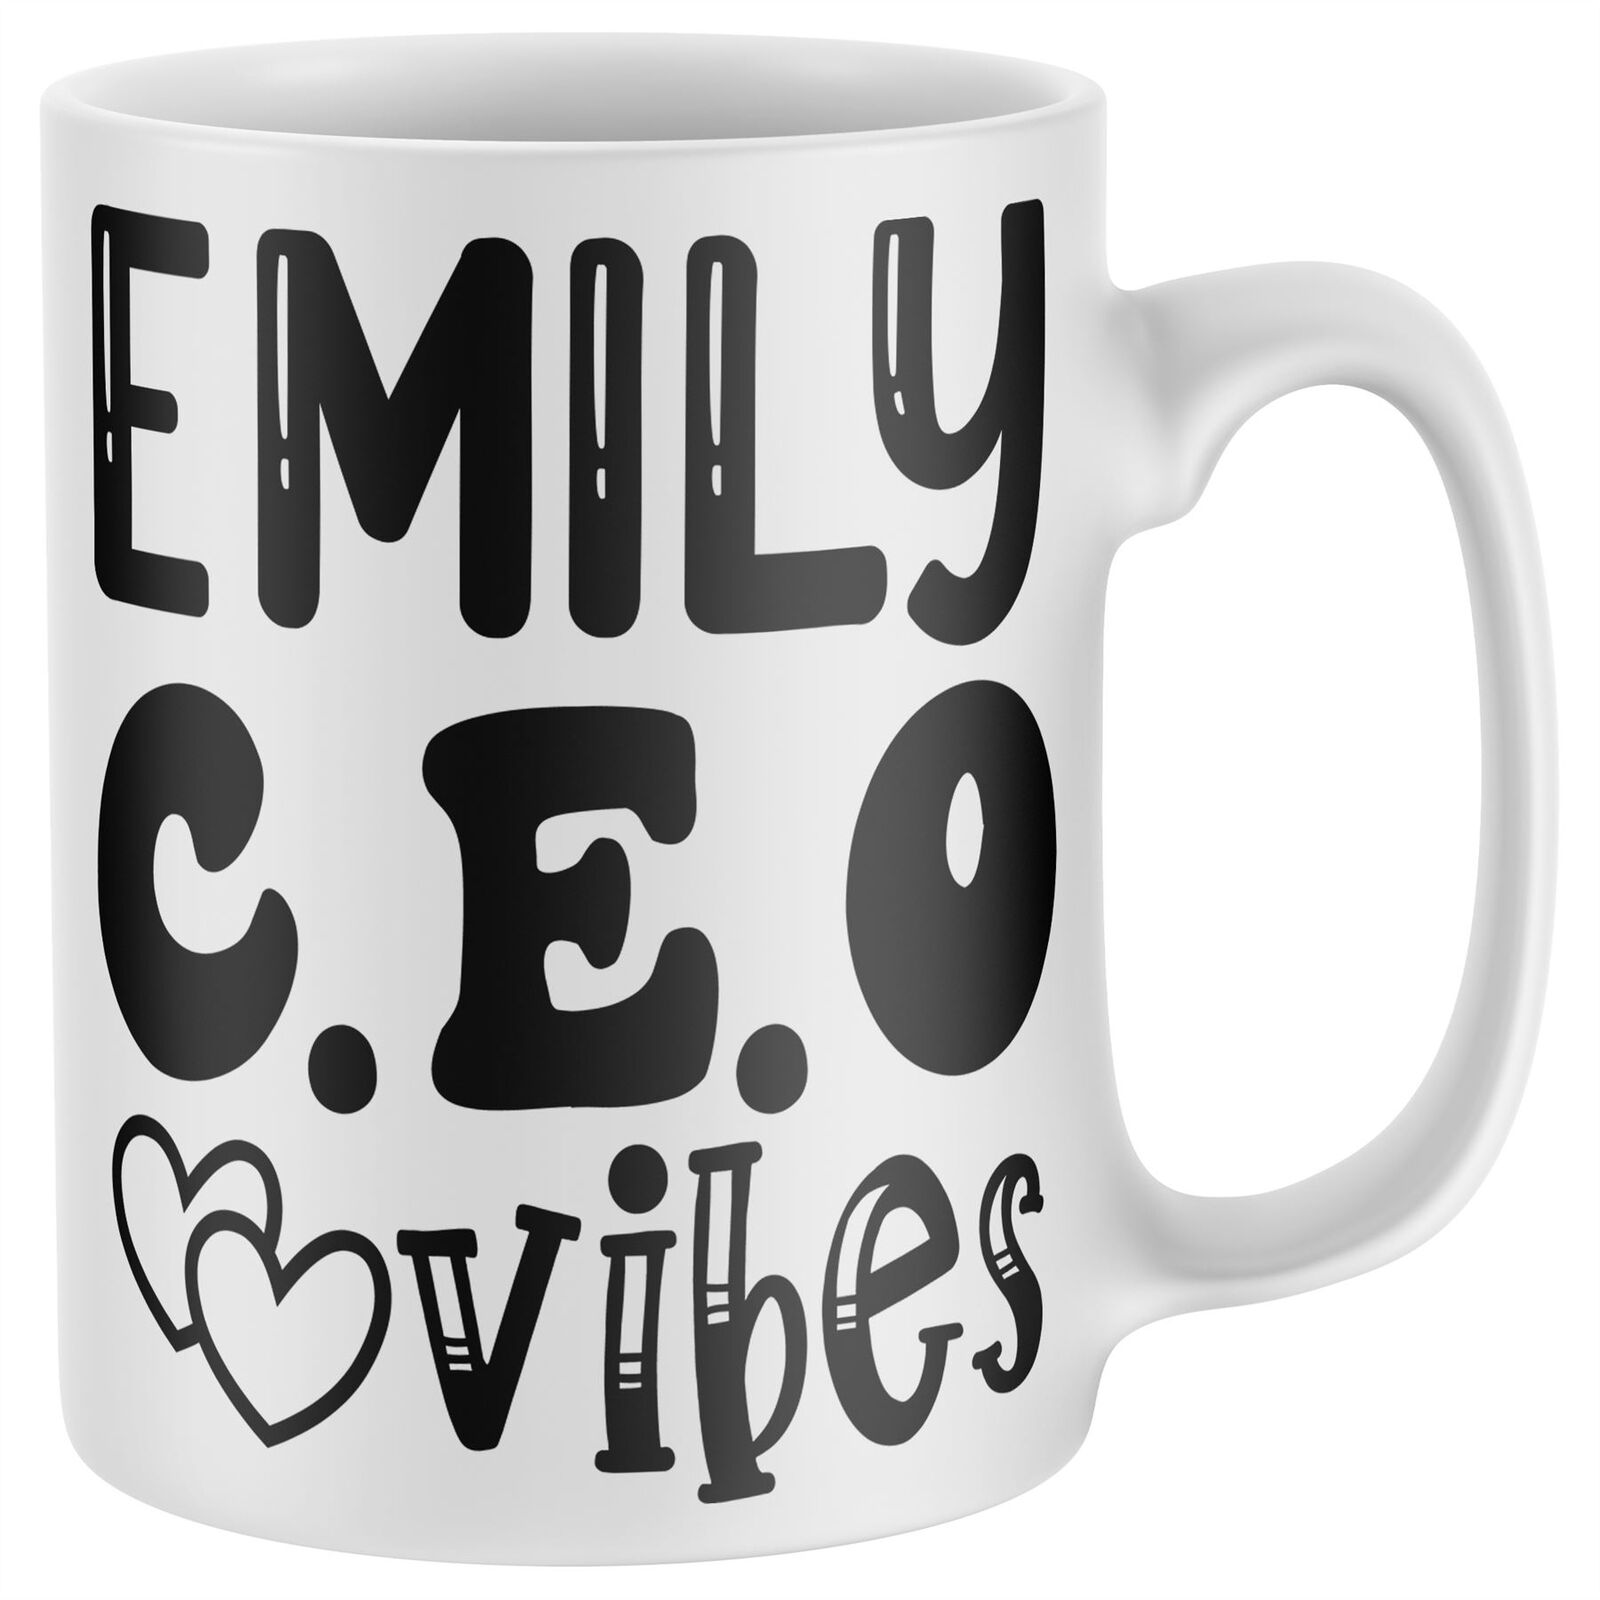 Custom CEO Gifts Small Business Owner Customized Funny Mugs Gifts Work Office